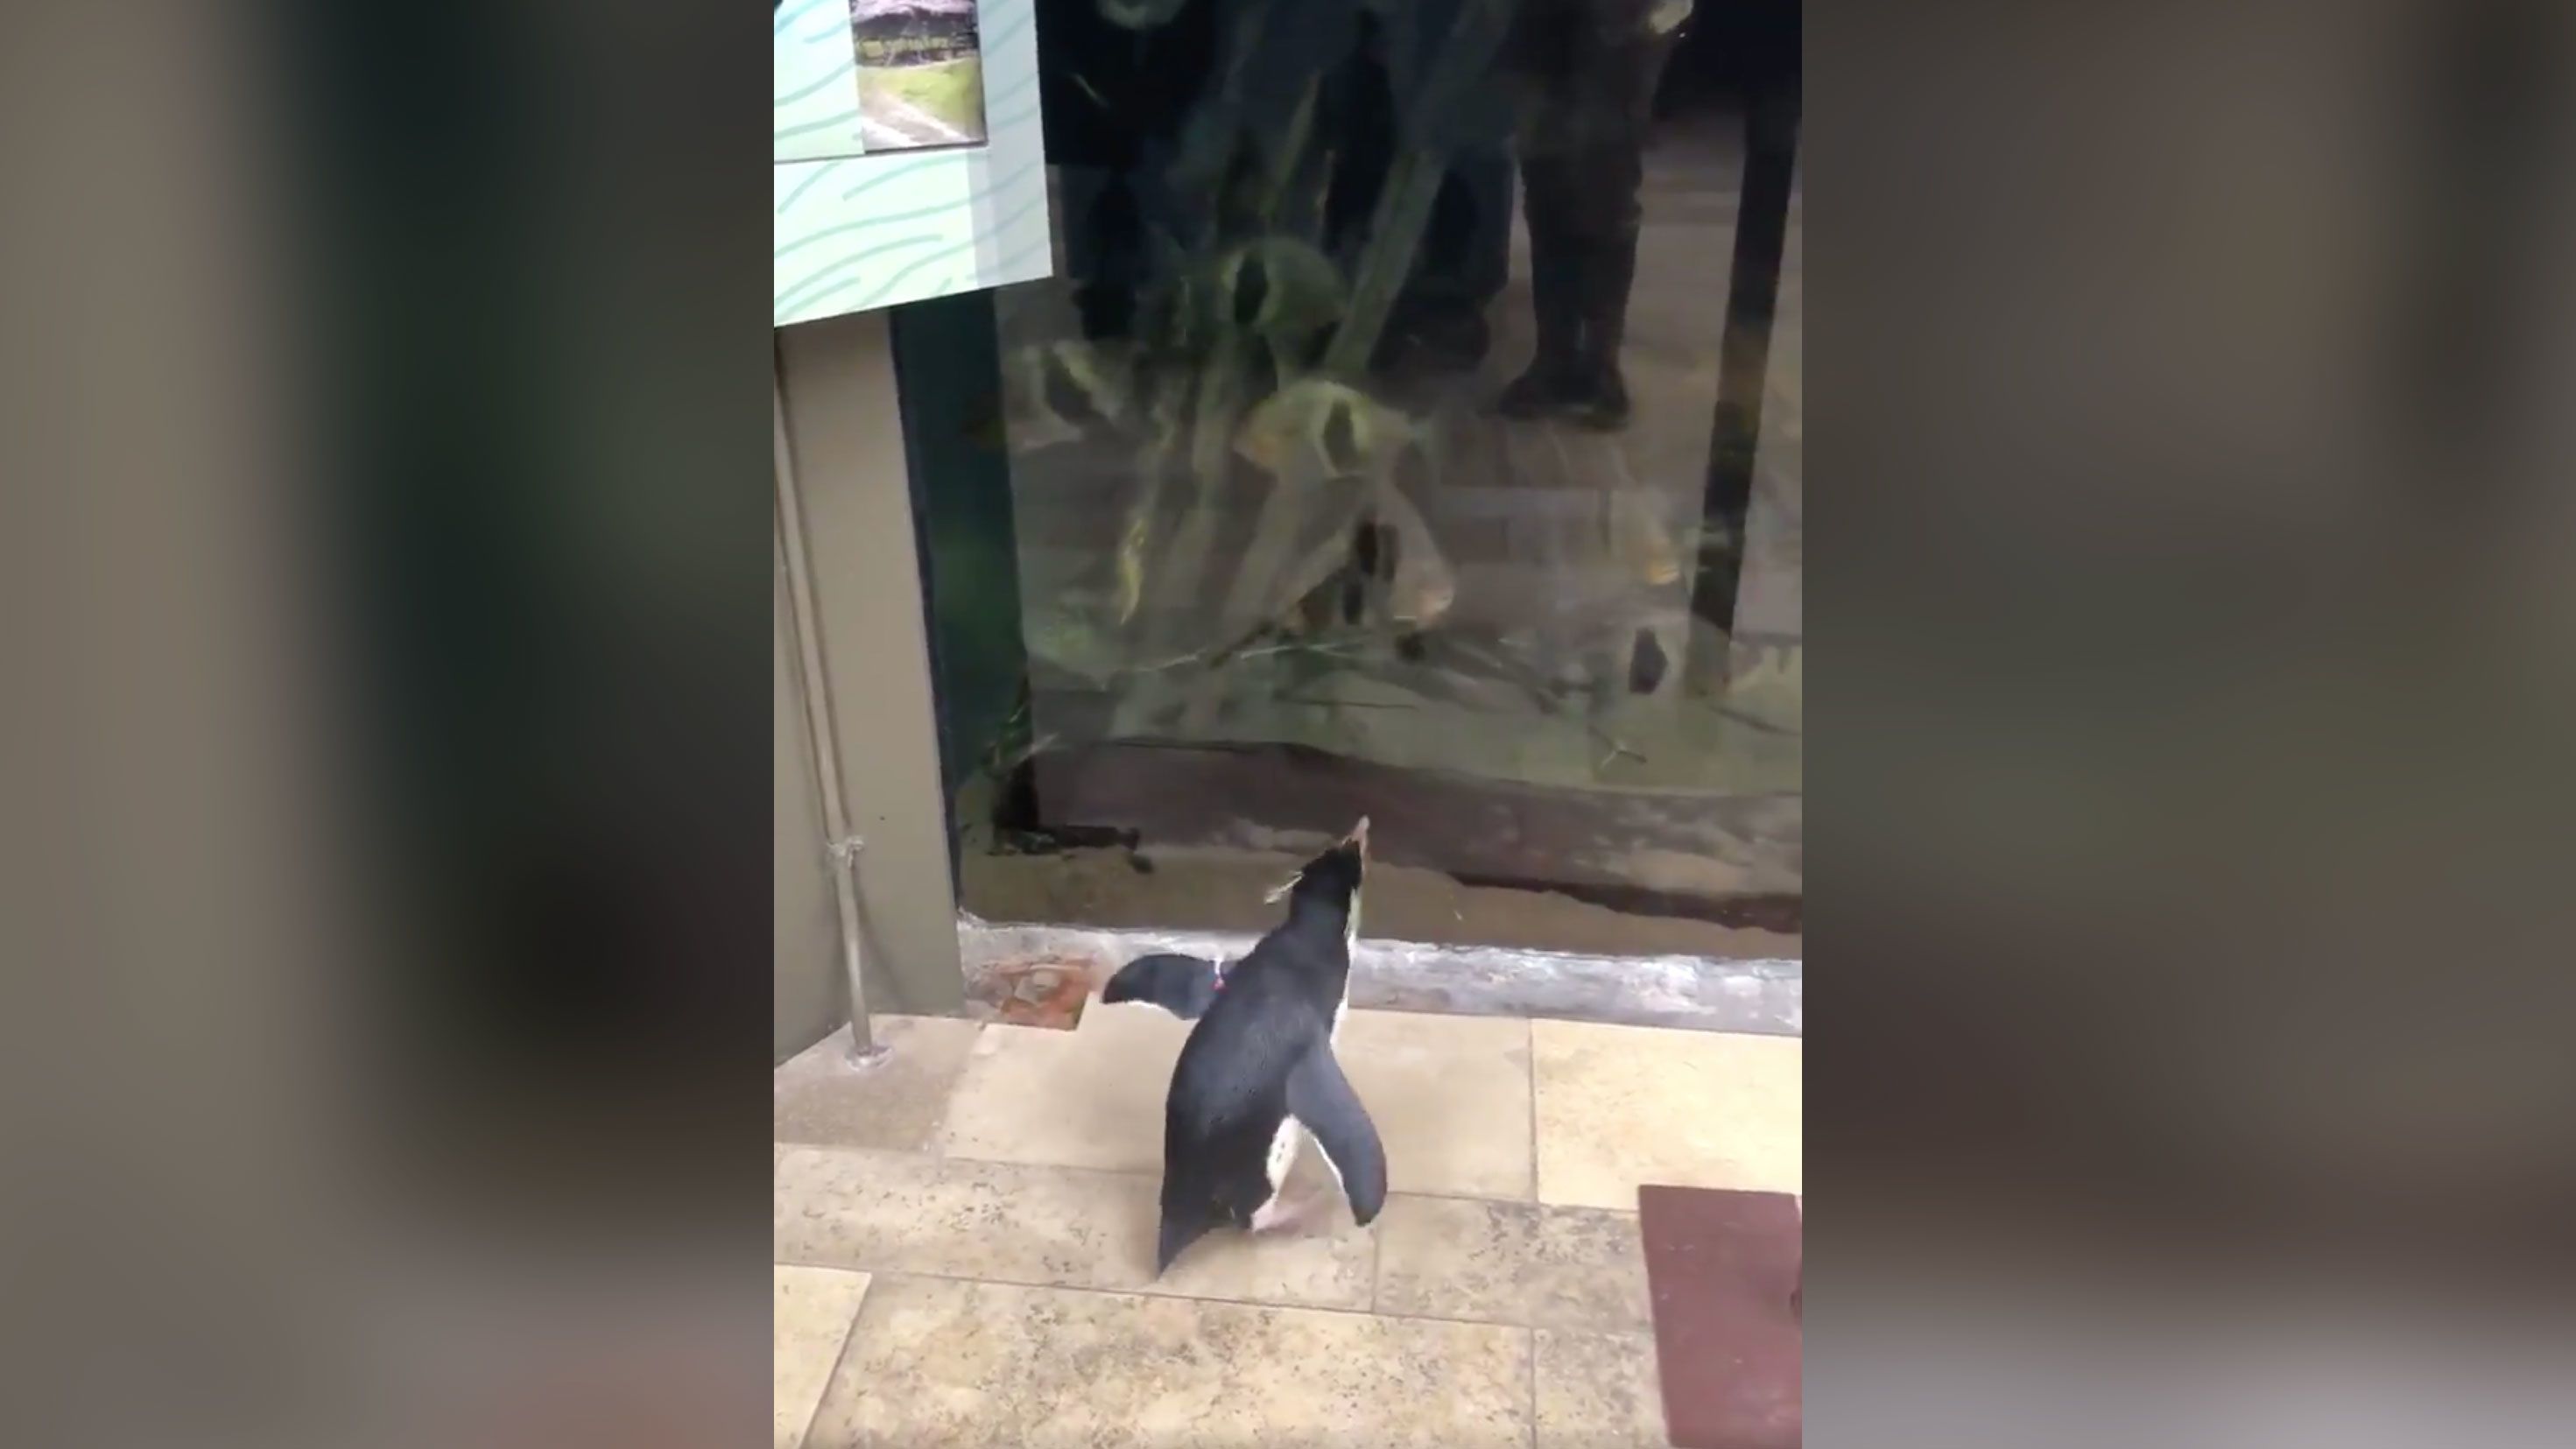 With the aquarium closed to humans, penguins take opportunity to explore and visit other animals | CNN